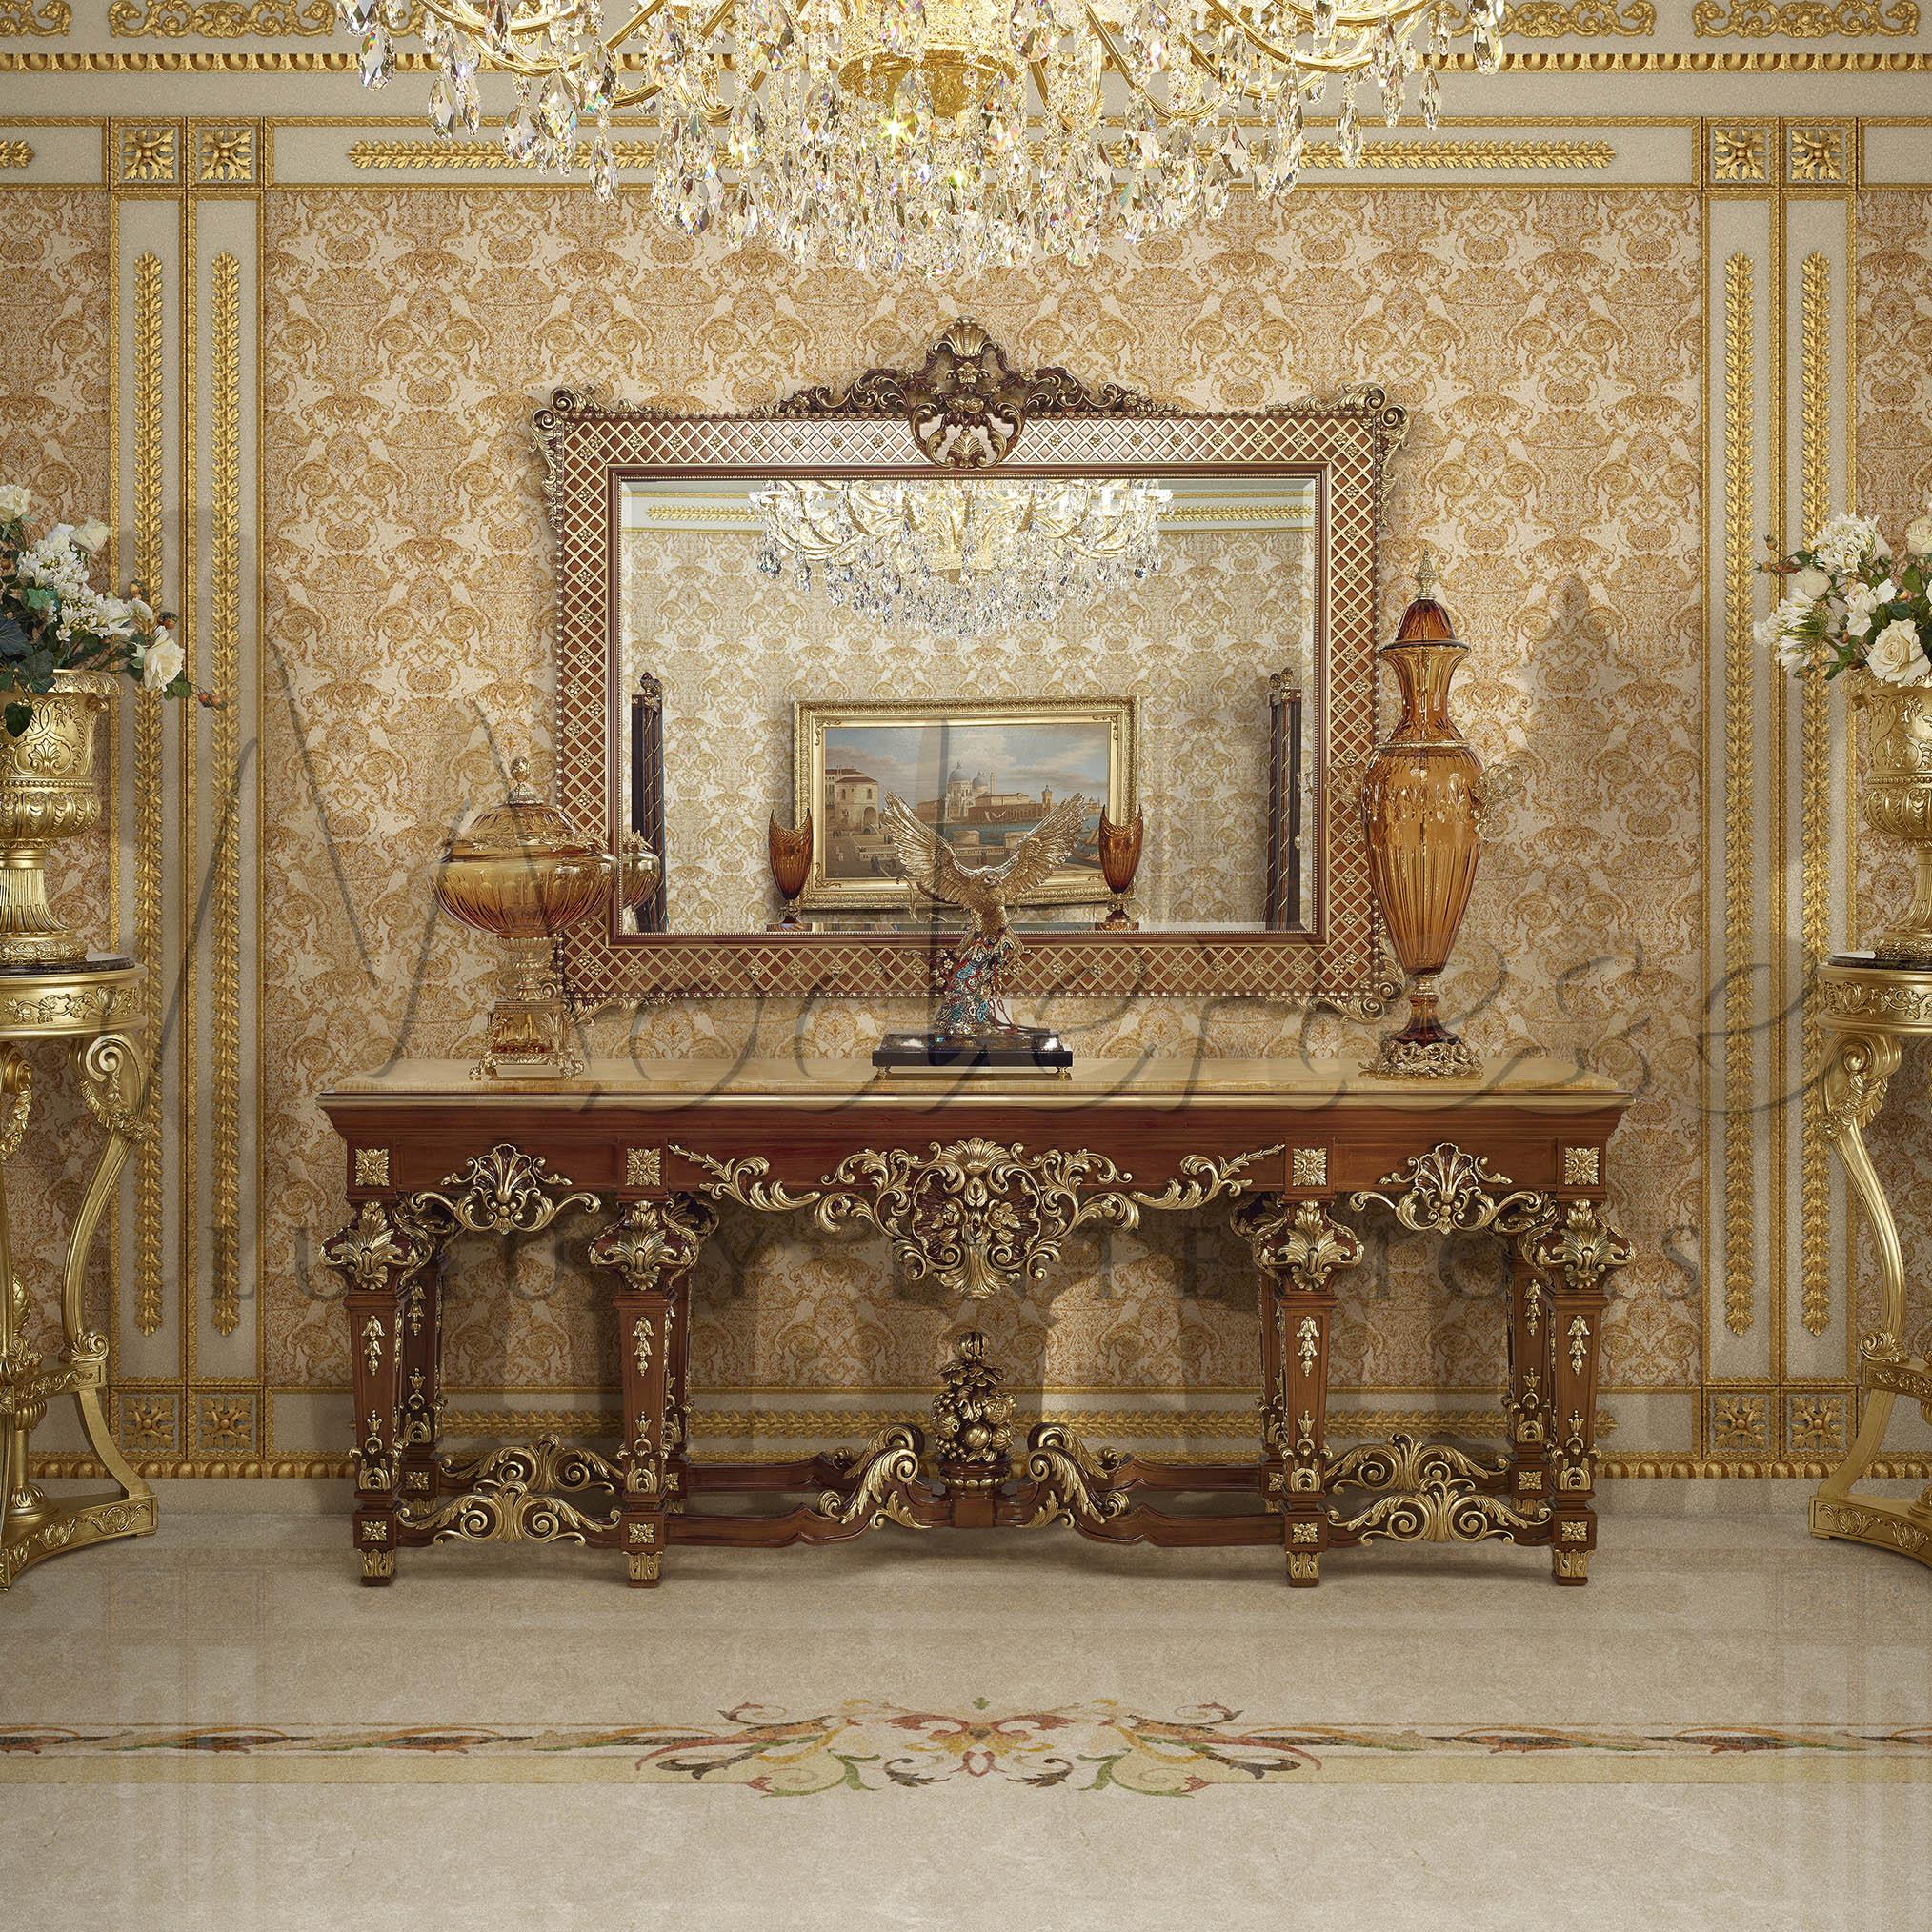 Decorate your private villa living with a fully customizable rococo console. This particular model features a natural walnut finishing with handmade carvings later hand decorated with gold leaf applications and cappuccino onyx for the top. Modenese